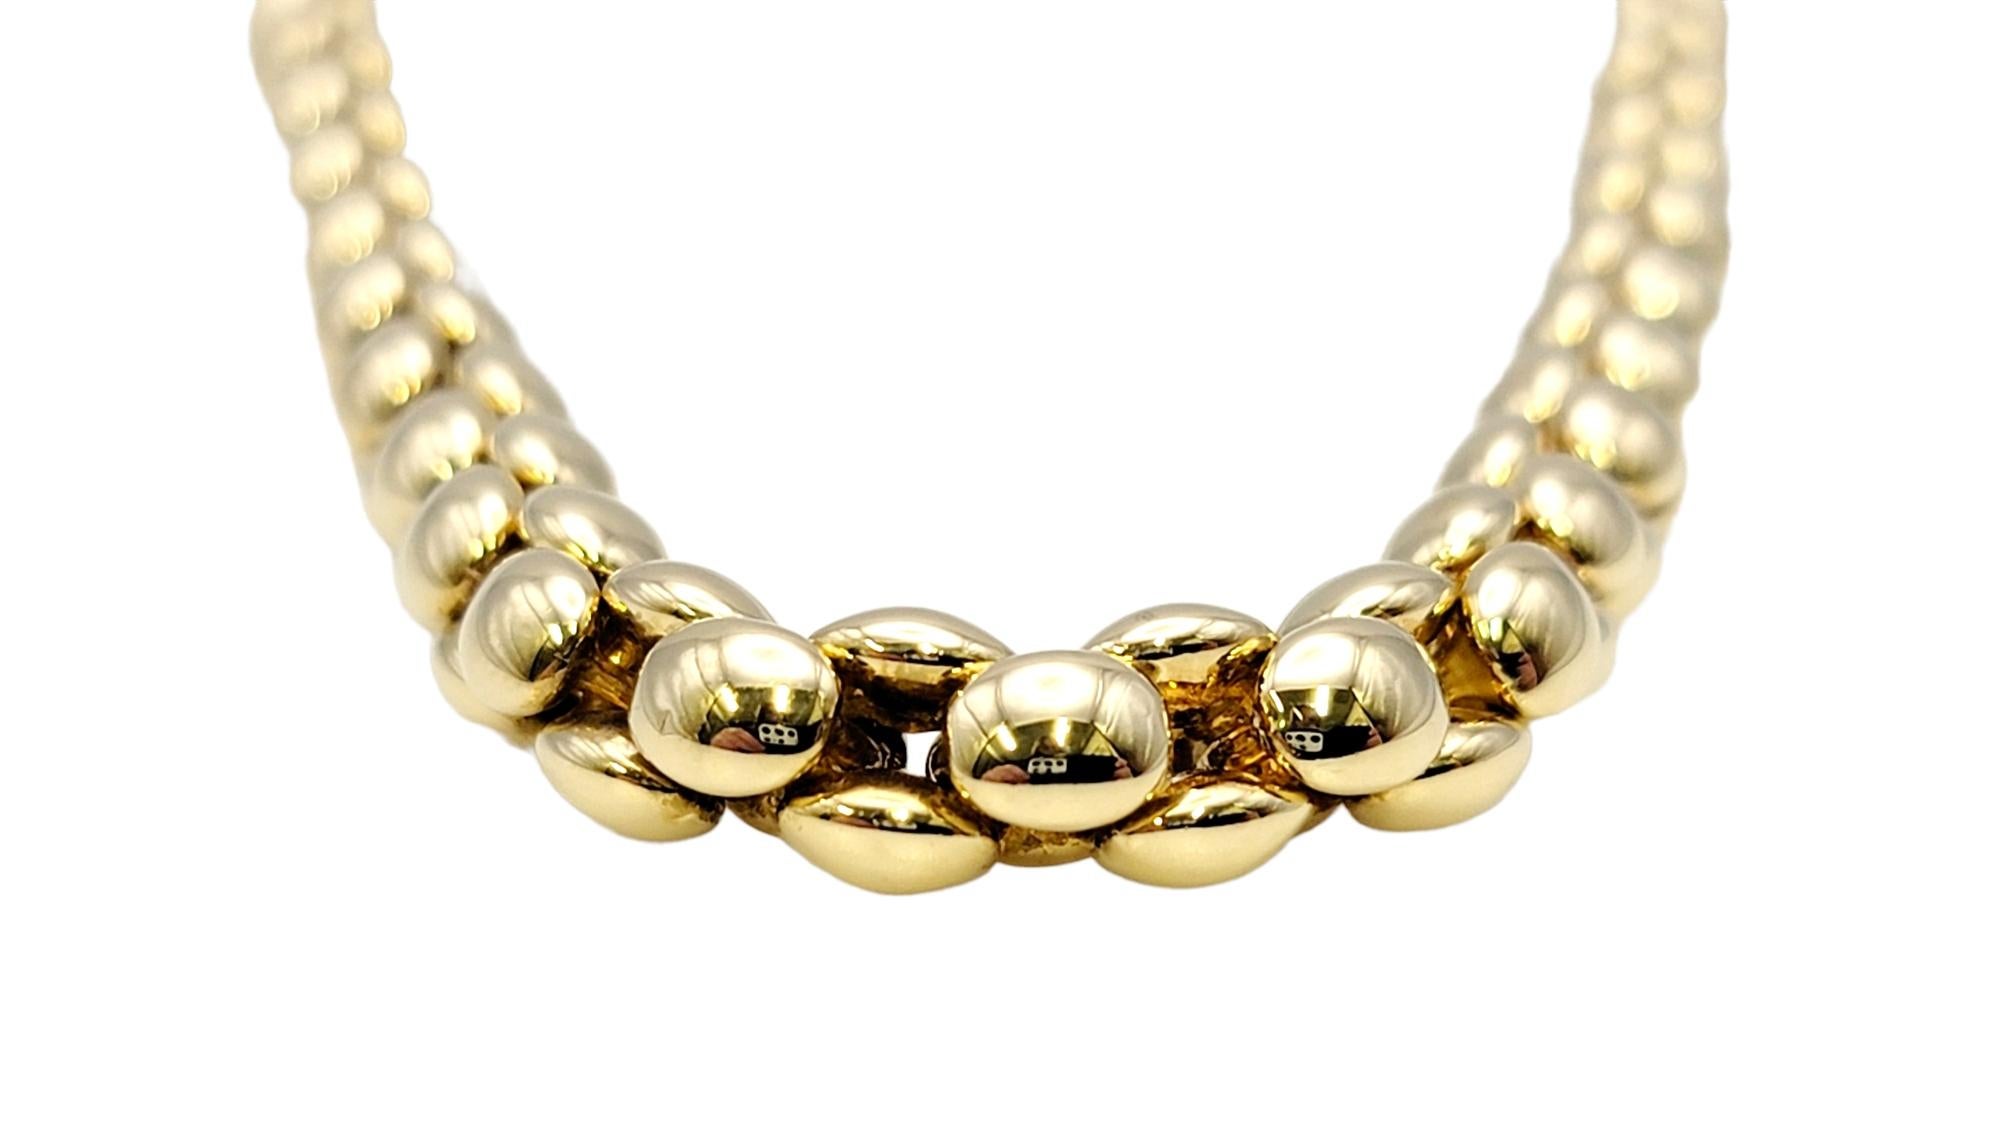 Chiampsean Polished 18 Karat Yellow Gold Chunky Popcorn Chain Necklace In Good Condition For Sale In Scottsdale, AZ